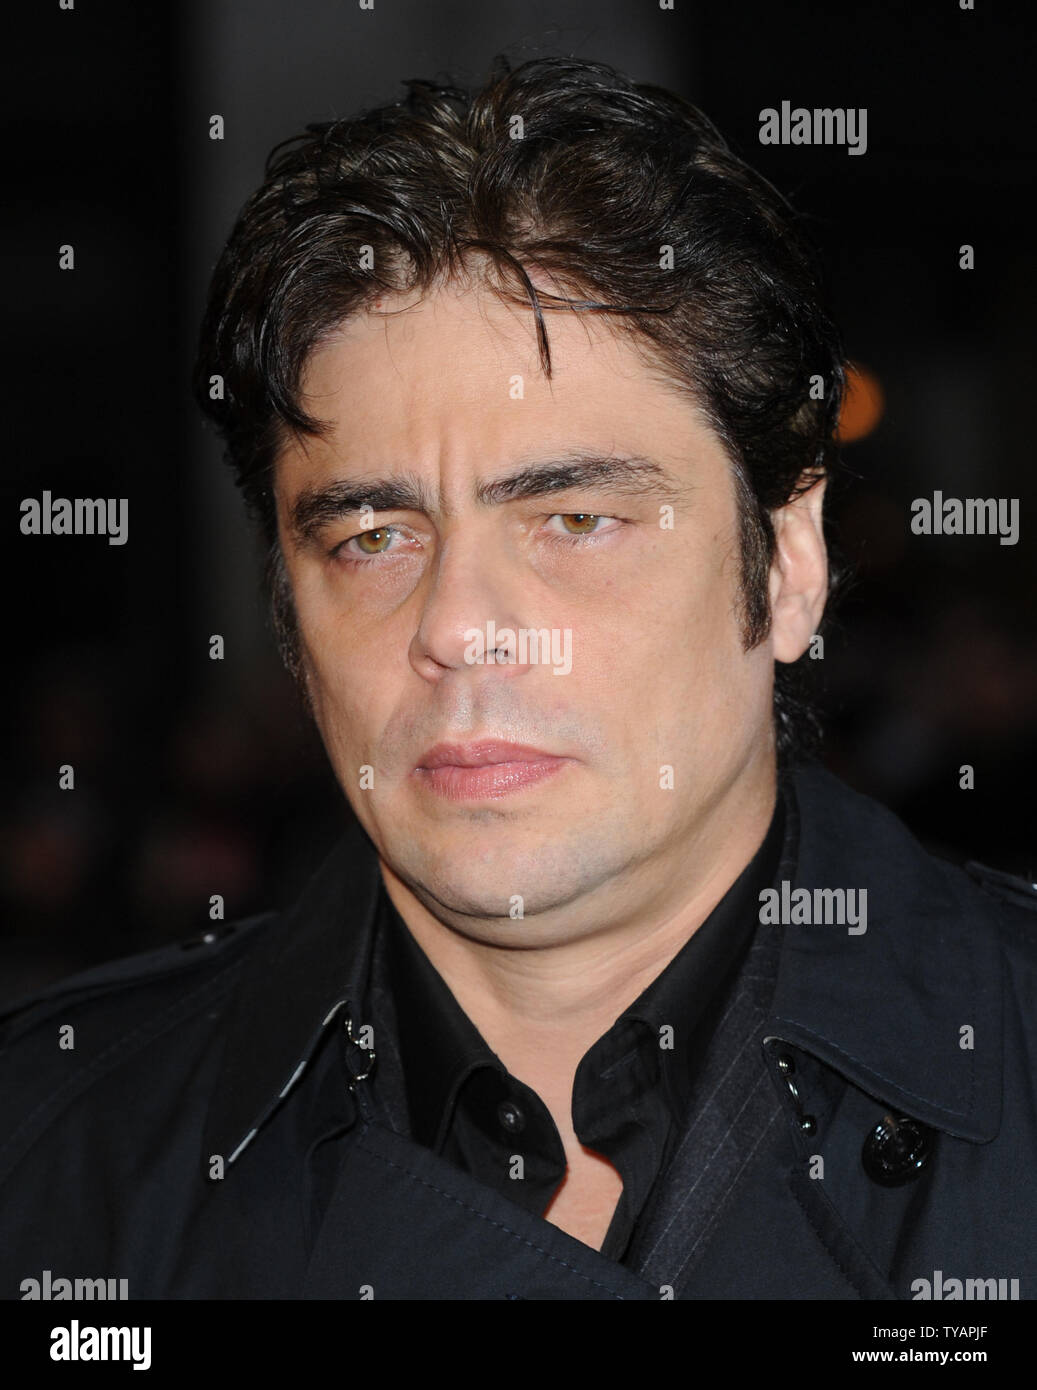 American actor Benicio Del Toro attends the premiere of 'Che' at The Times BFI London Film Festival at Odeon West End, Leicester Square in London on October 25, 2008.  (UPI Photo/Rune Hellestad) Stock Photo